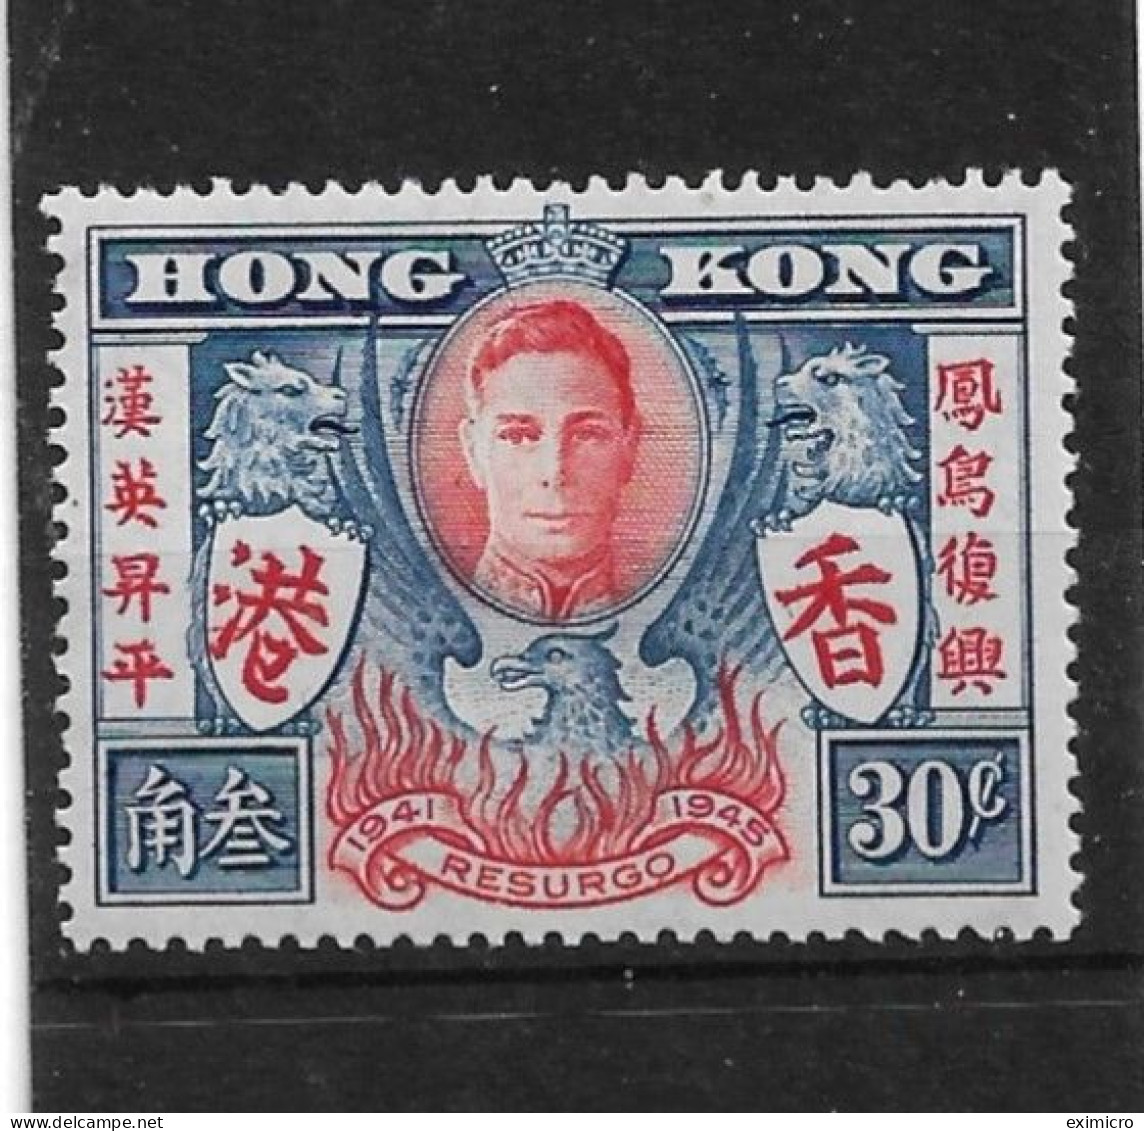 HONG KONG 1946 VICTORY 30c SG 169a 'EXTRA STROKE' VARIETY MOUNTED MINT Cat £140 - Nuovi